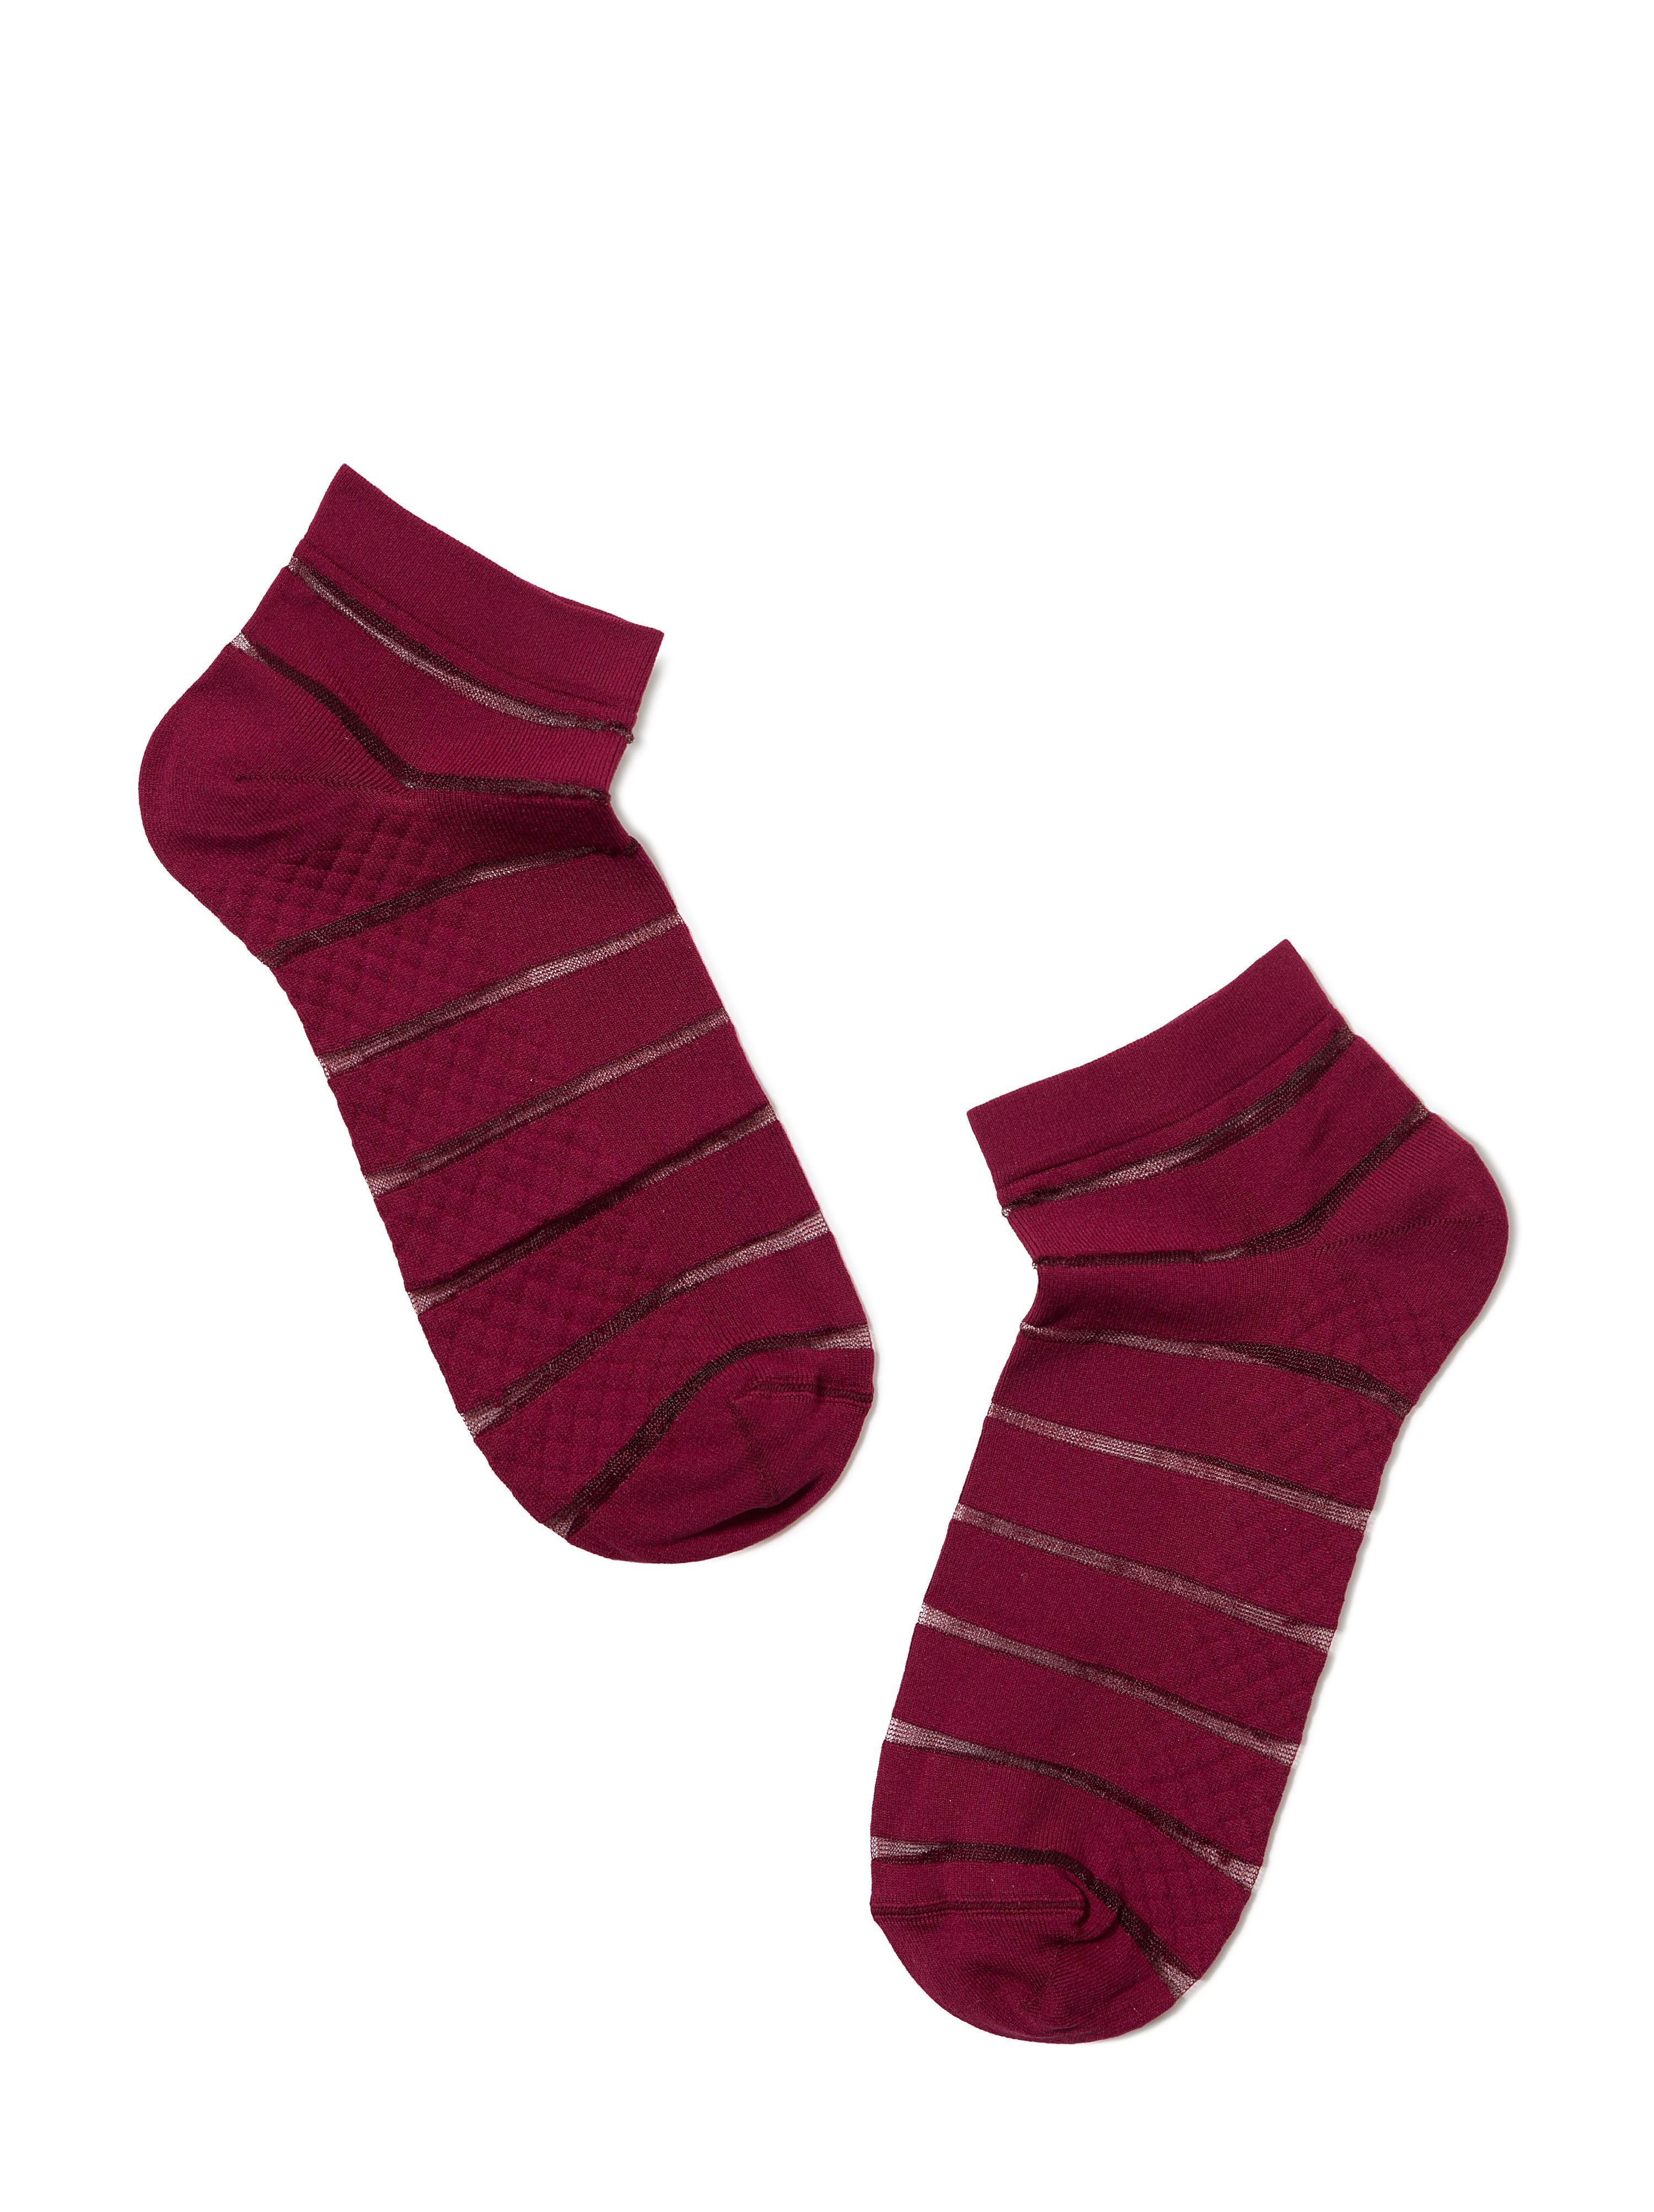 Funny women's ankle socks burgundy color with lycra by Conte Elegant